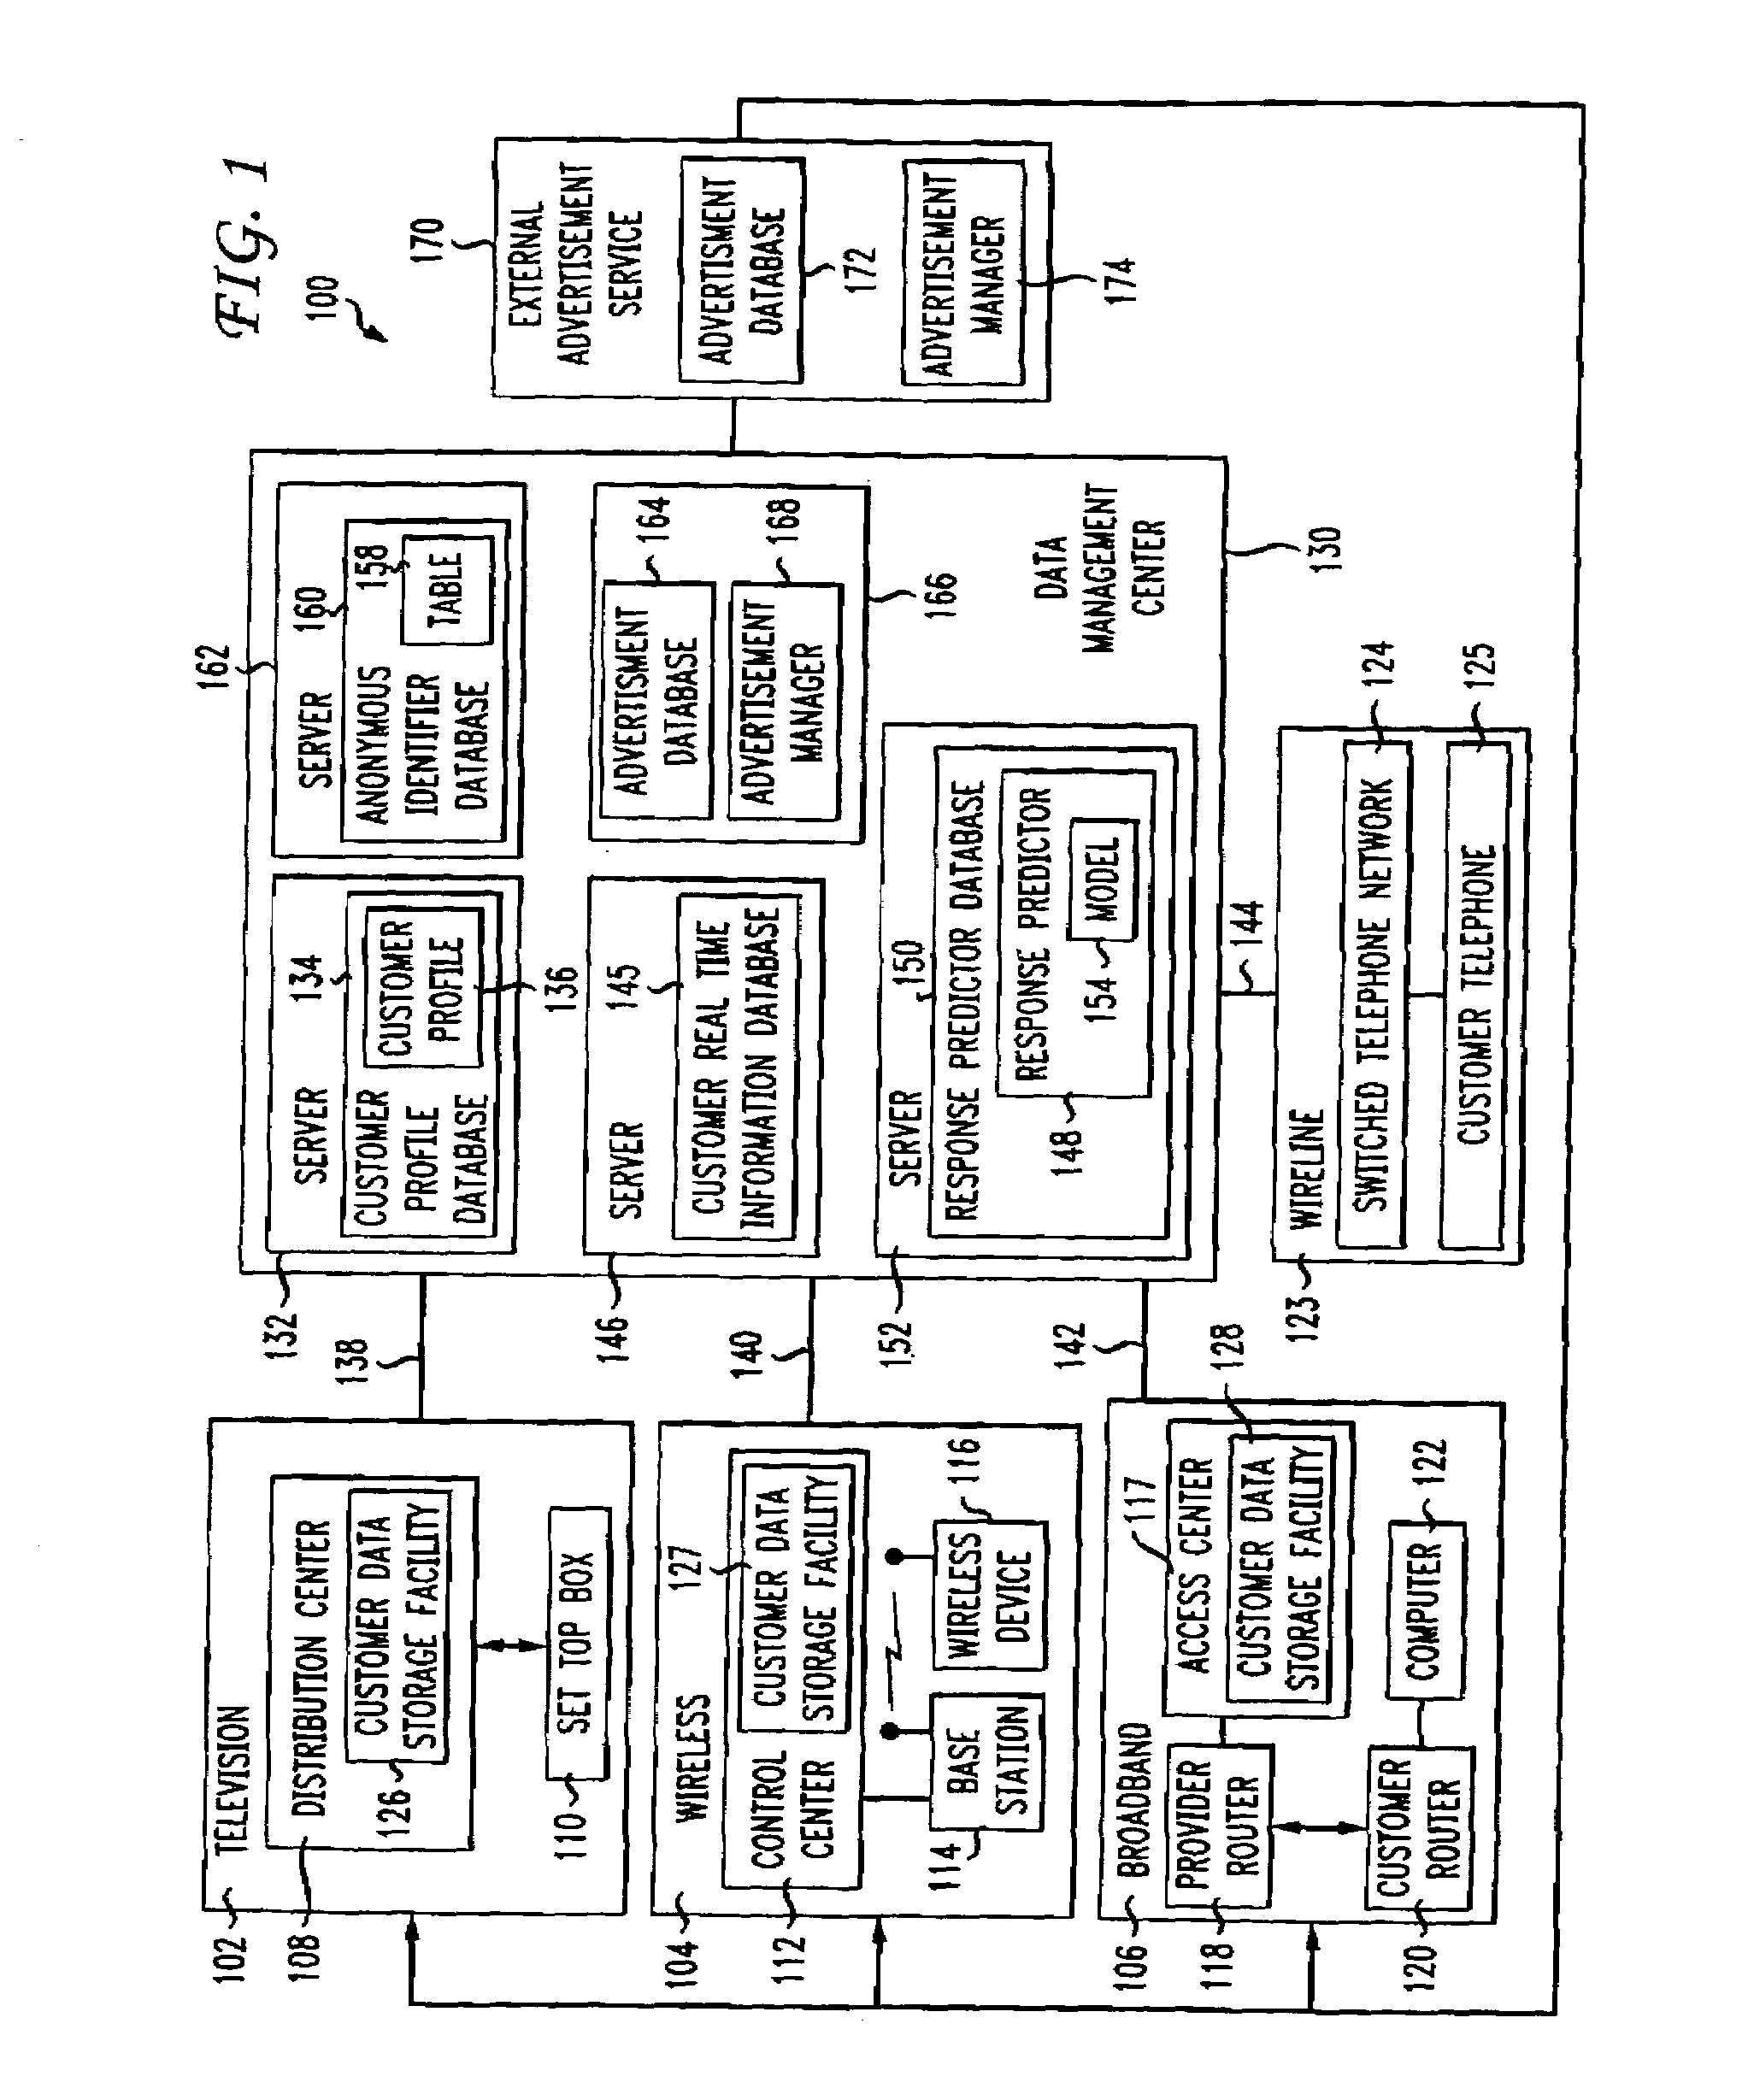 Methods and Apparatus for Individualized Content Delivery